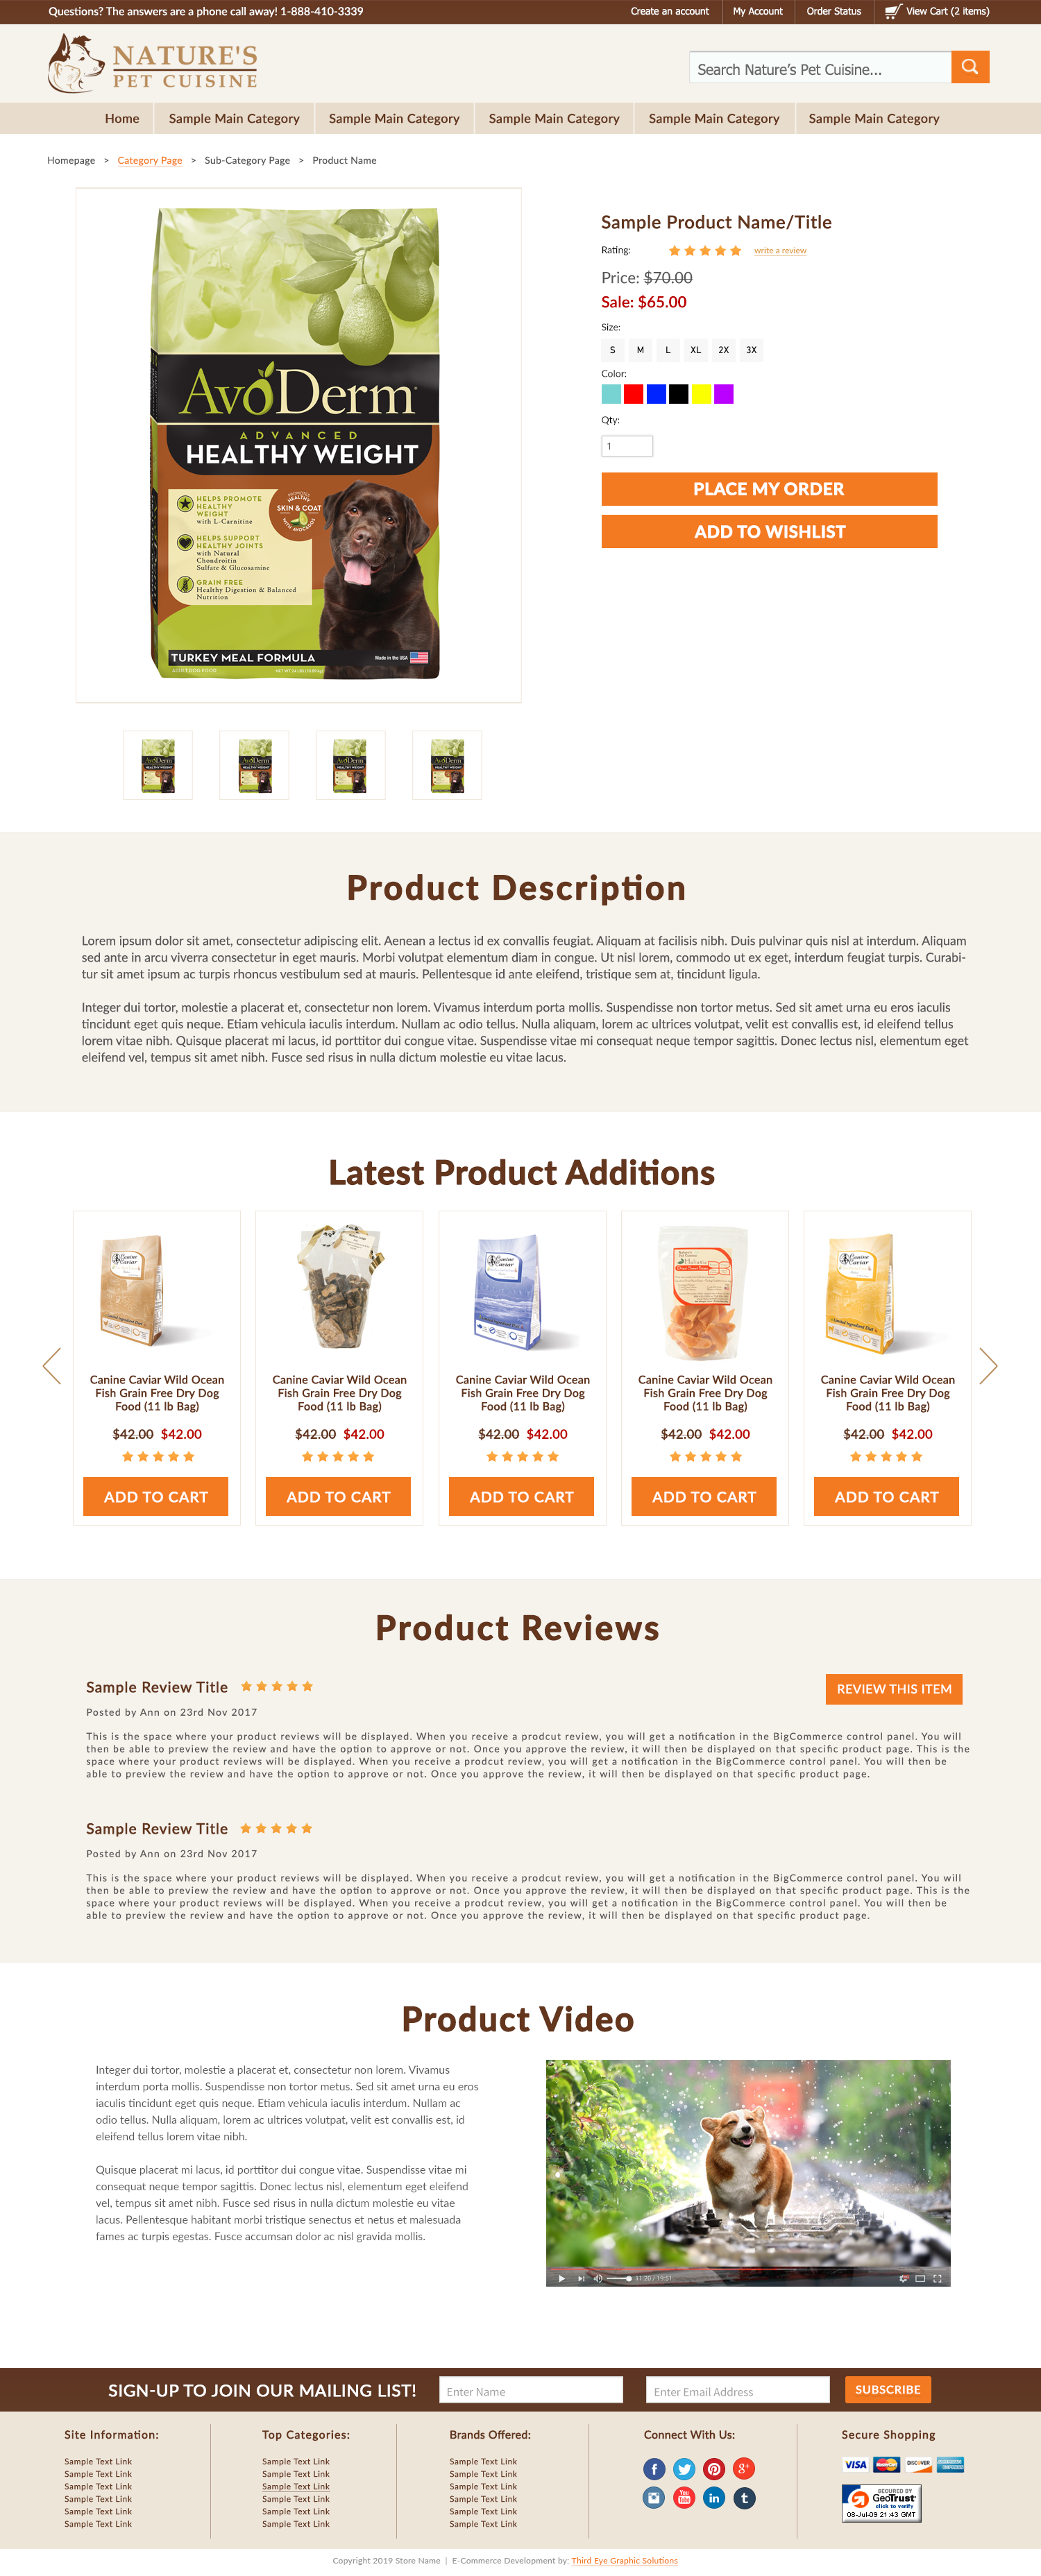 NaturesPet-product.png